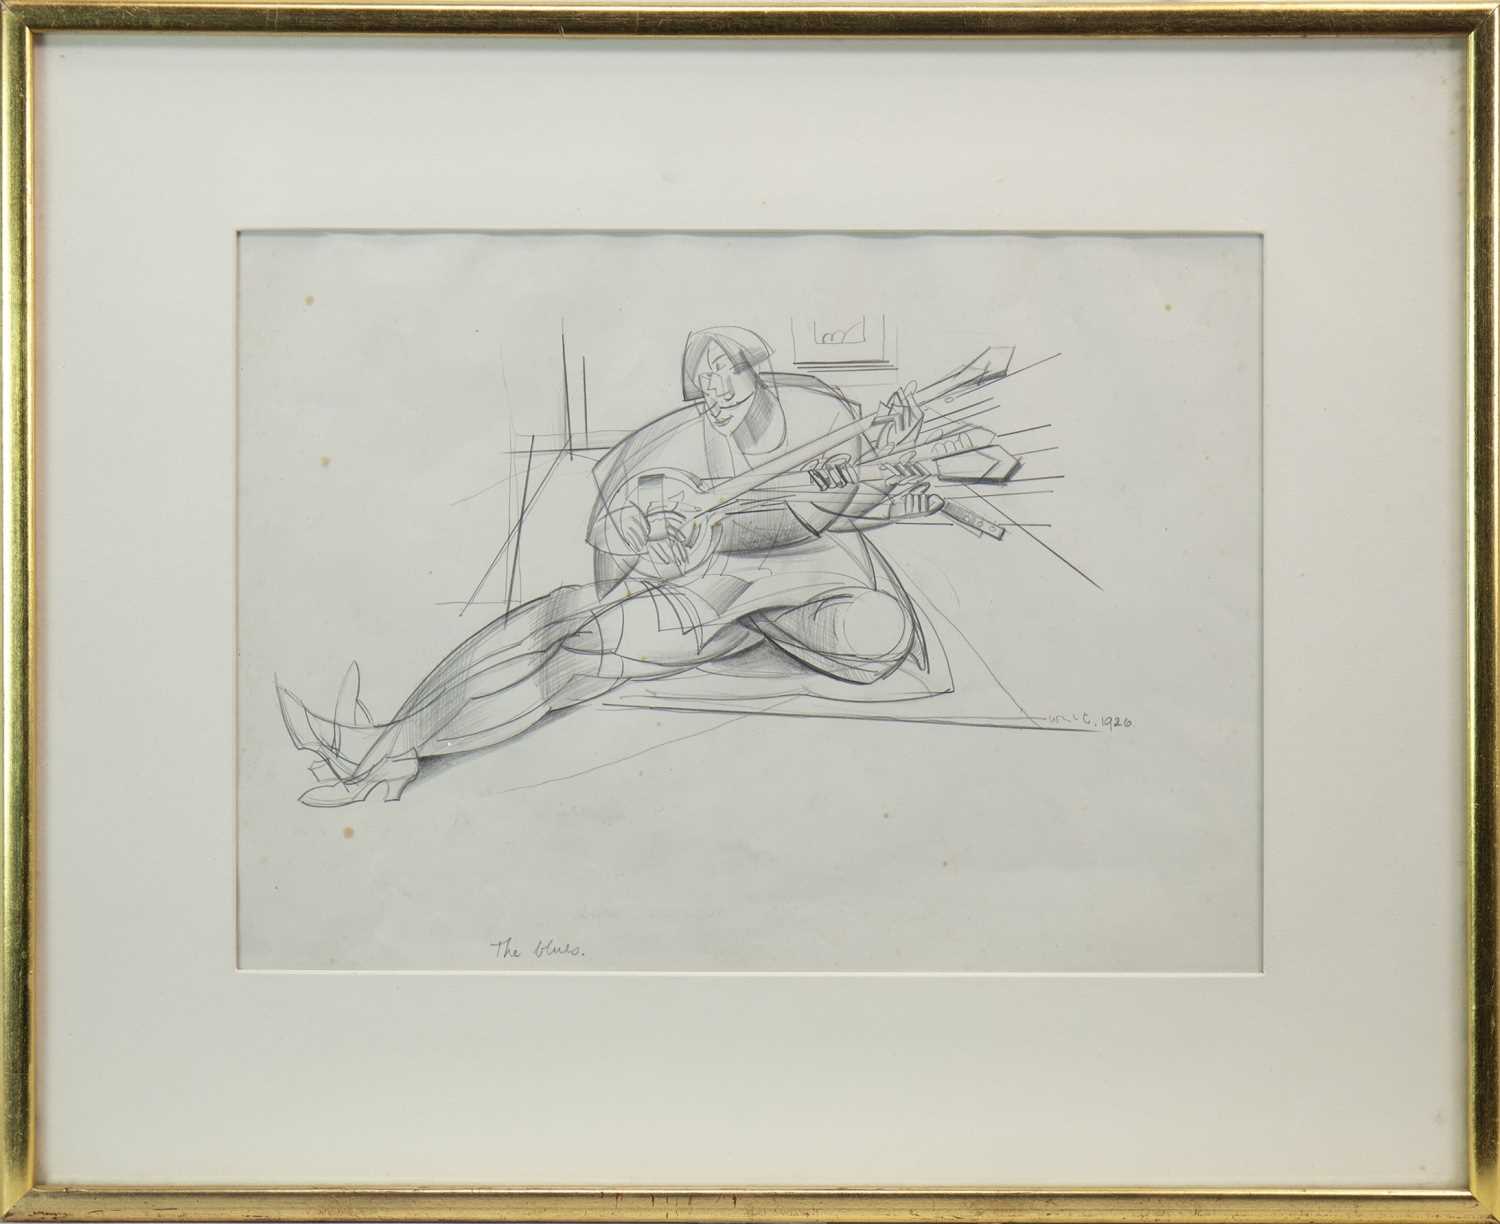 Lot 678 - THE BLUES, A PENCIL DRAWING BY WILLIAM MCCANCE